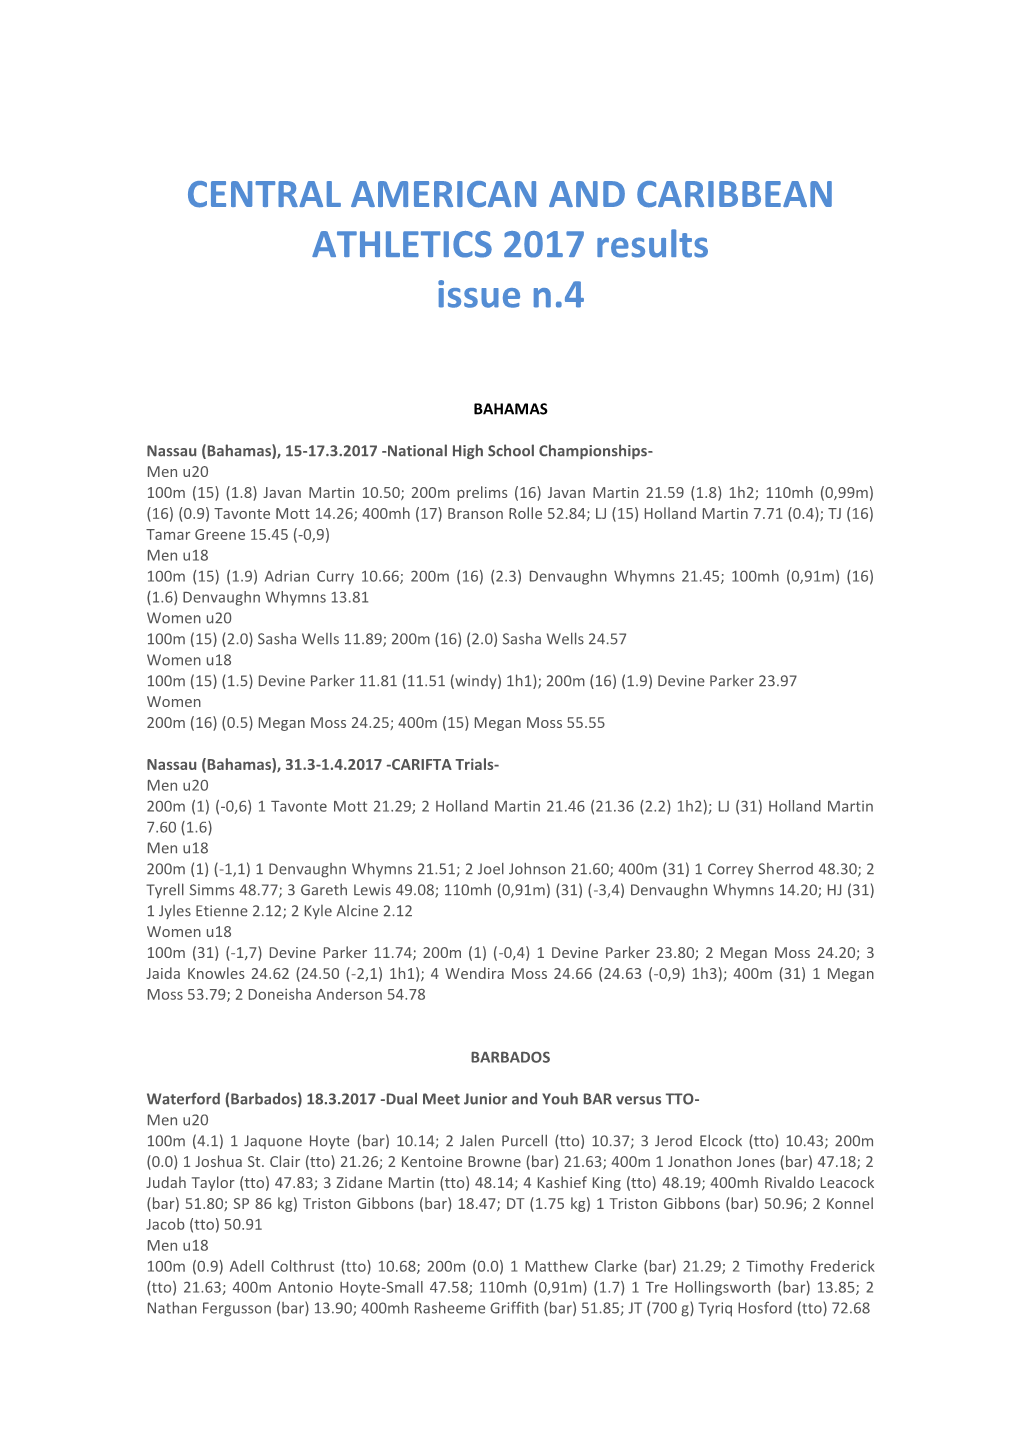 CENTRAL AMERICAN and CARIBBEAN ATHLETICS 2017 Results Issue N.4